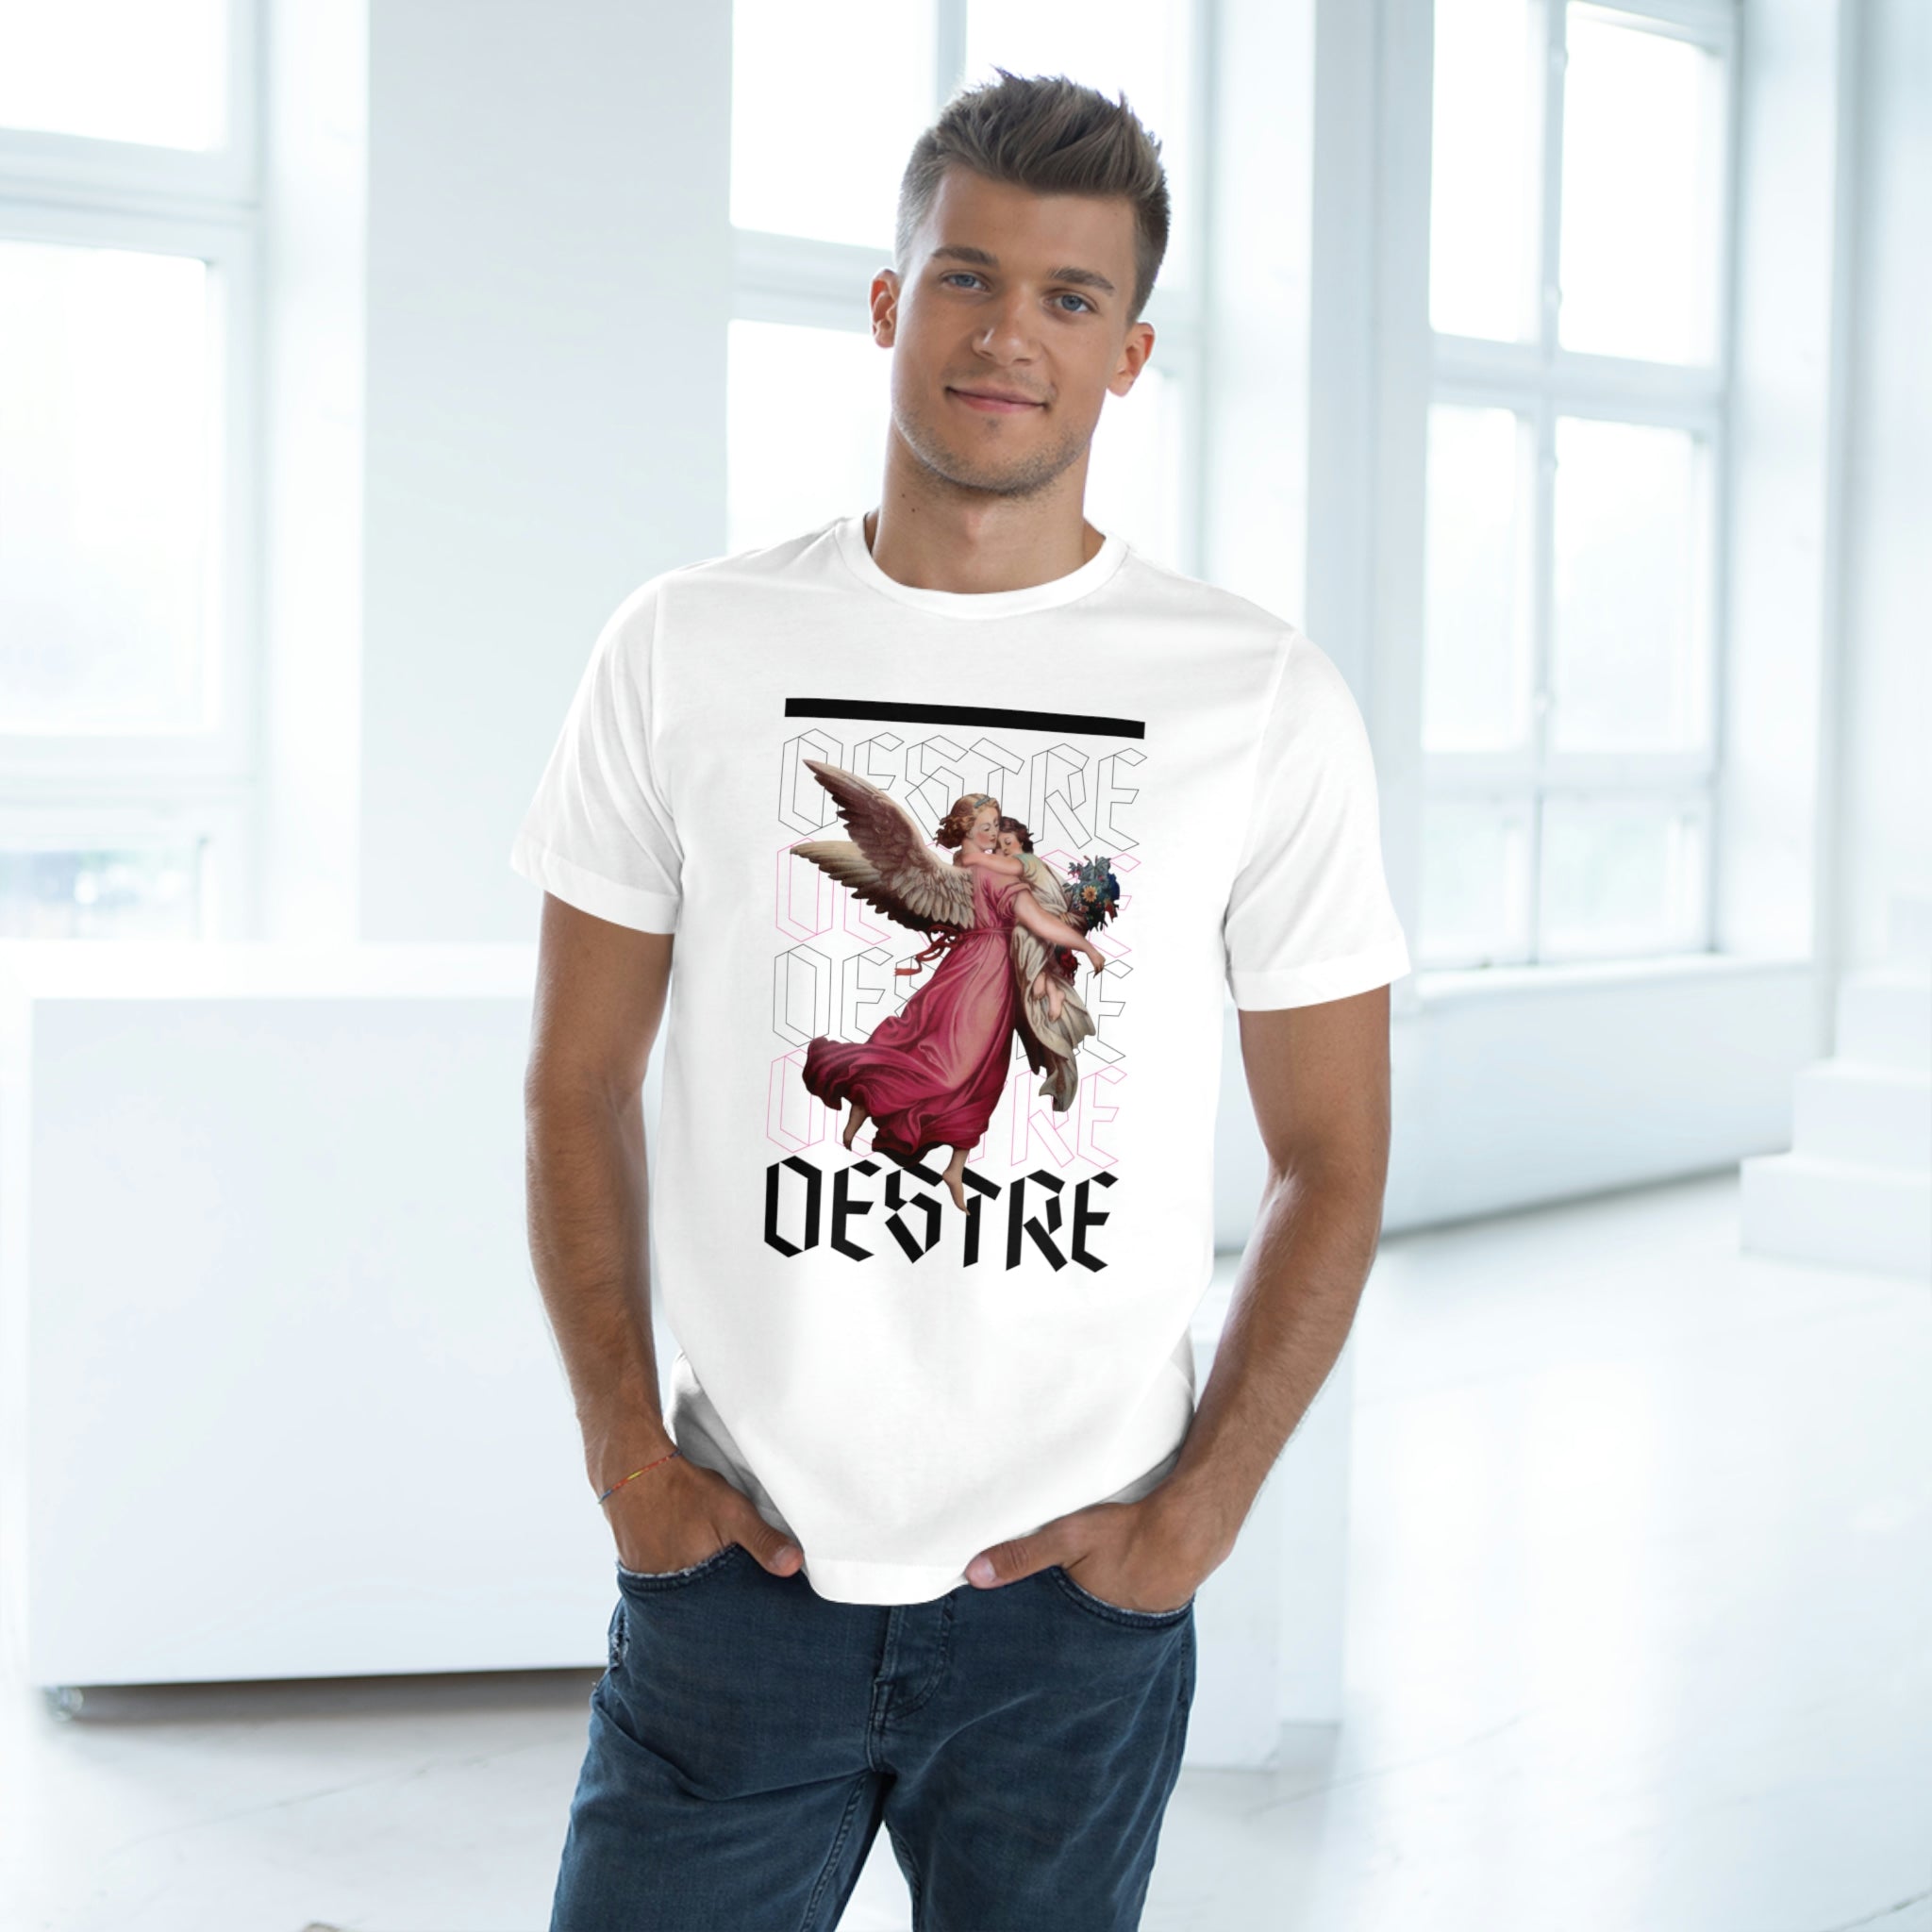 NSFW Collection Volume 3: Oestre Tee